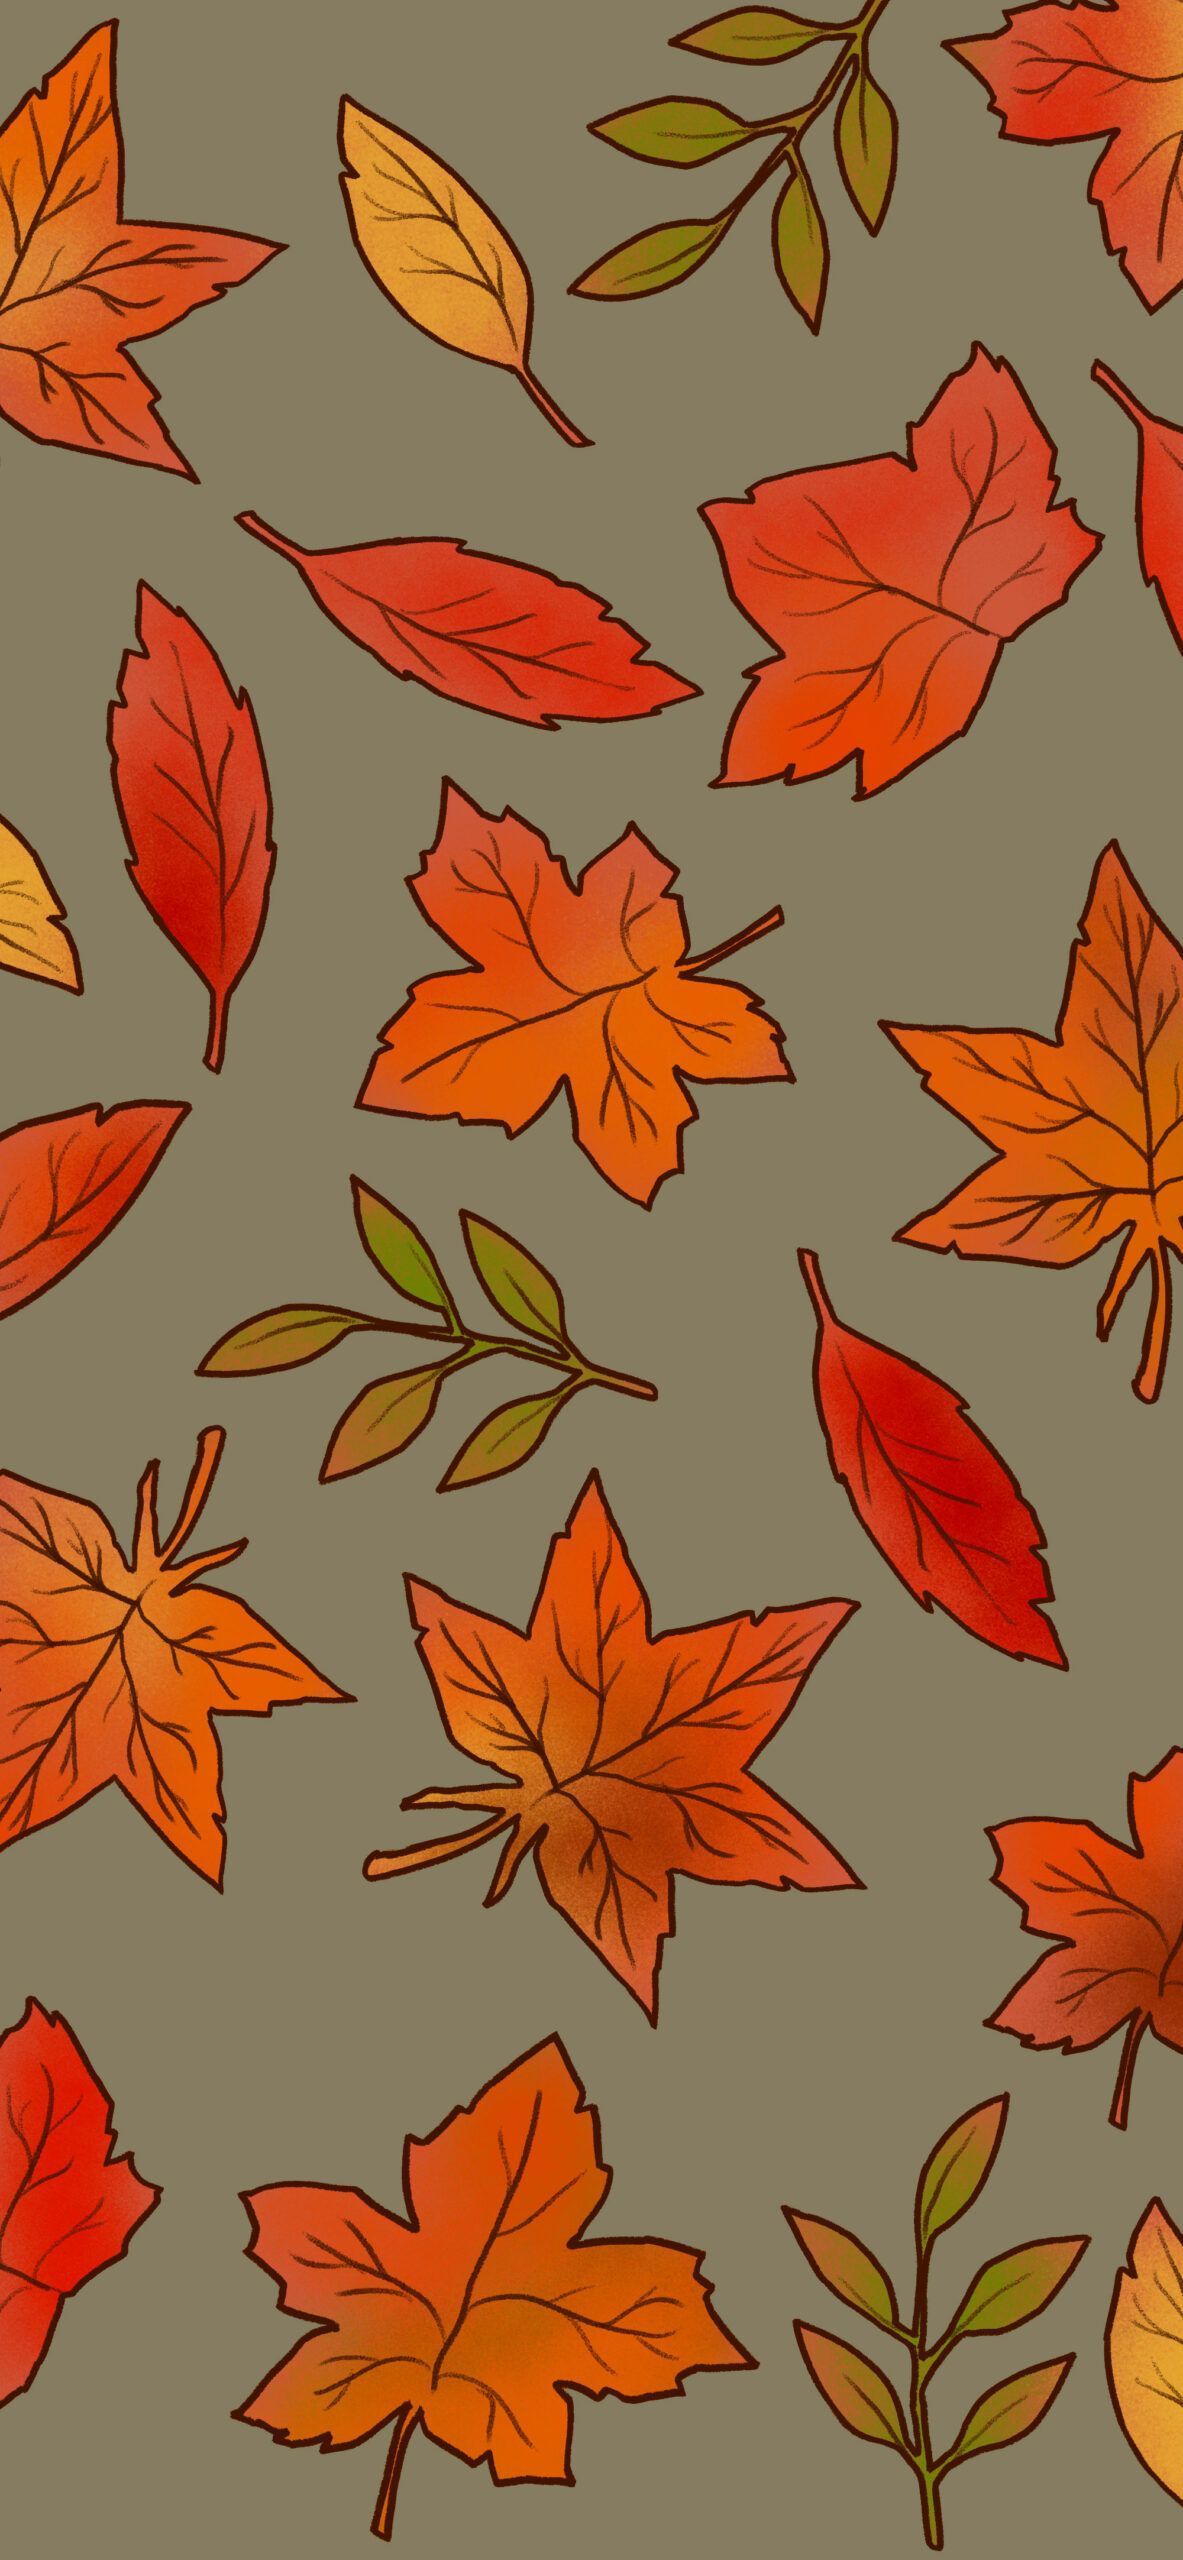 A wallpaper with orange, yellow, and green leaves on a brown background - Fall, leaves, fall iPhone